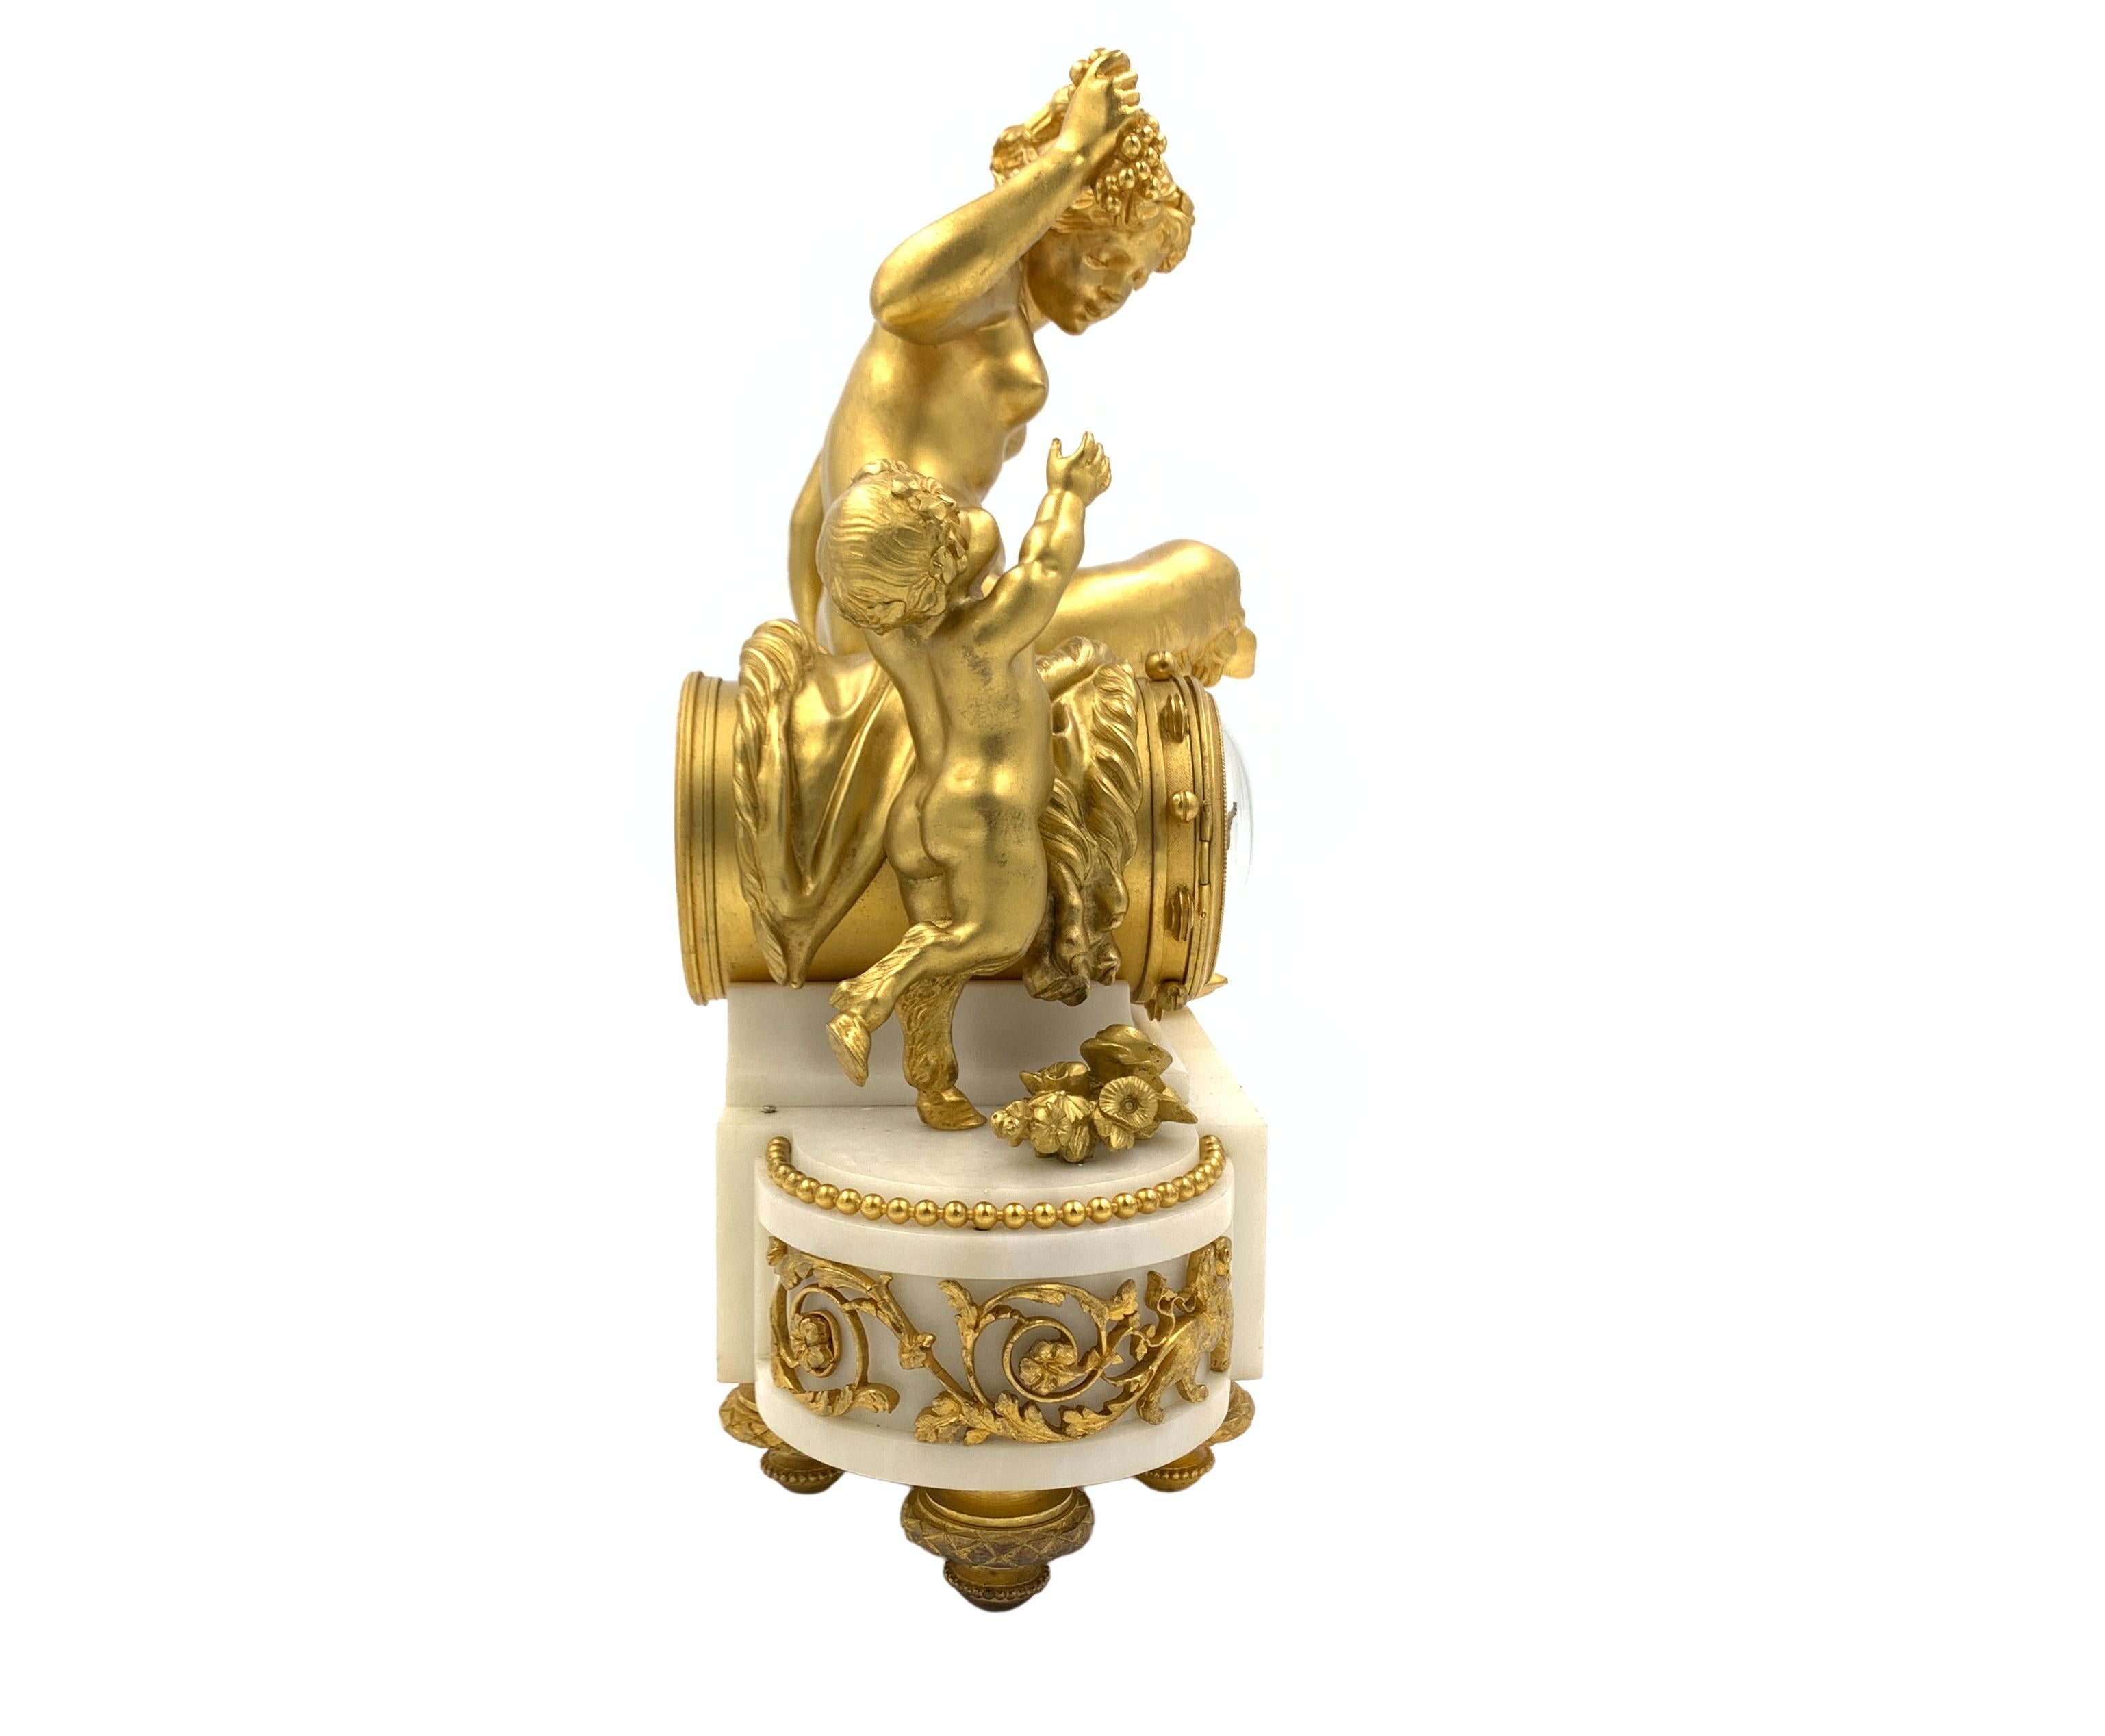 This playful Louis XVI style gilt-bronze and white marble clock, made by François Linke after a Clodion design, late 19th century.